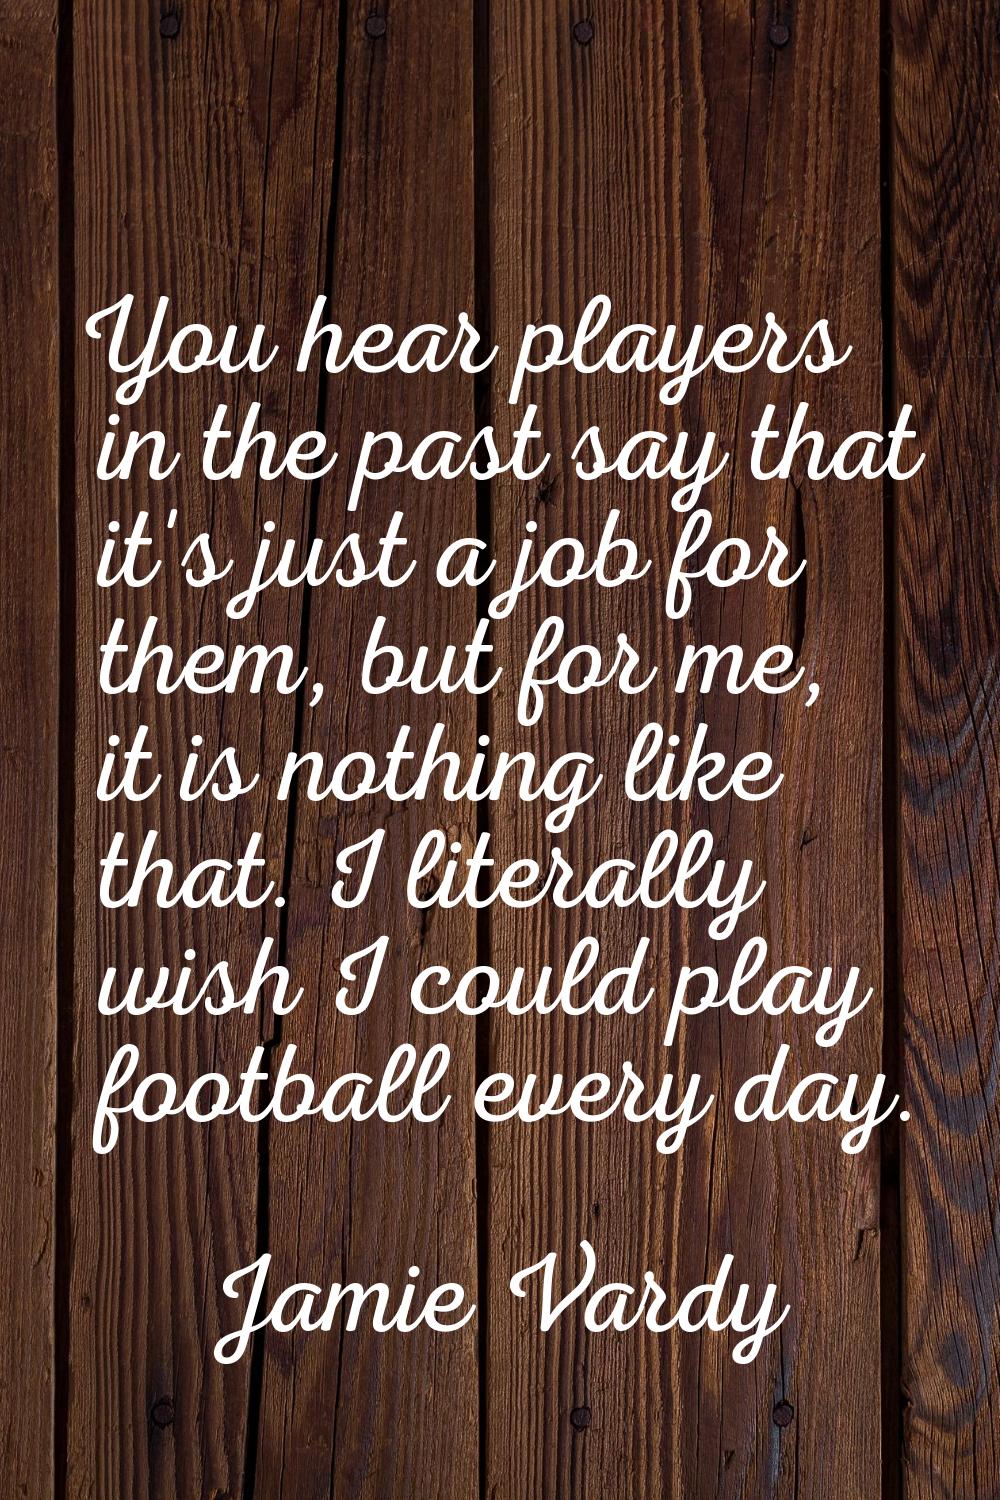 You hear players in the past say that it's just a job for them, but for me, it is nothing like that